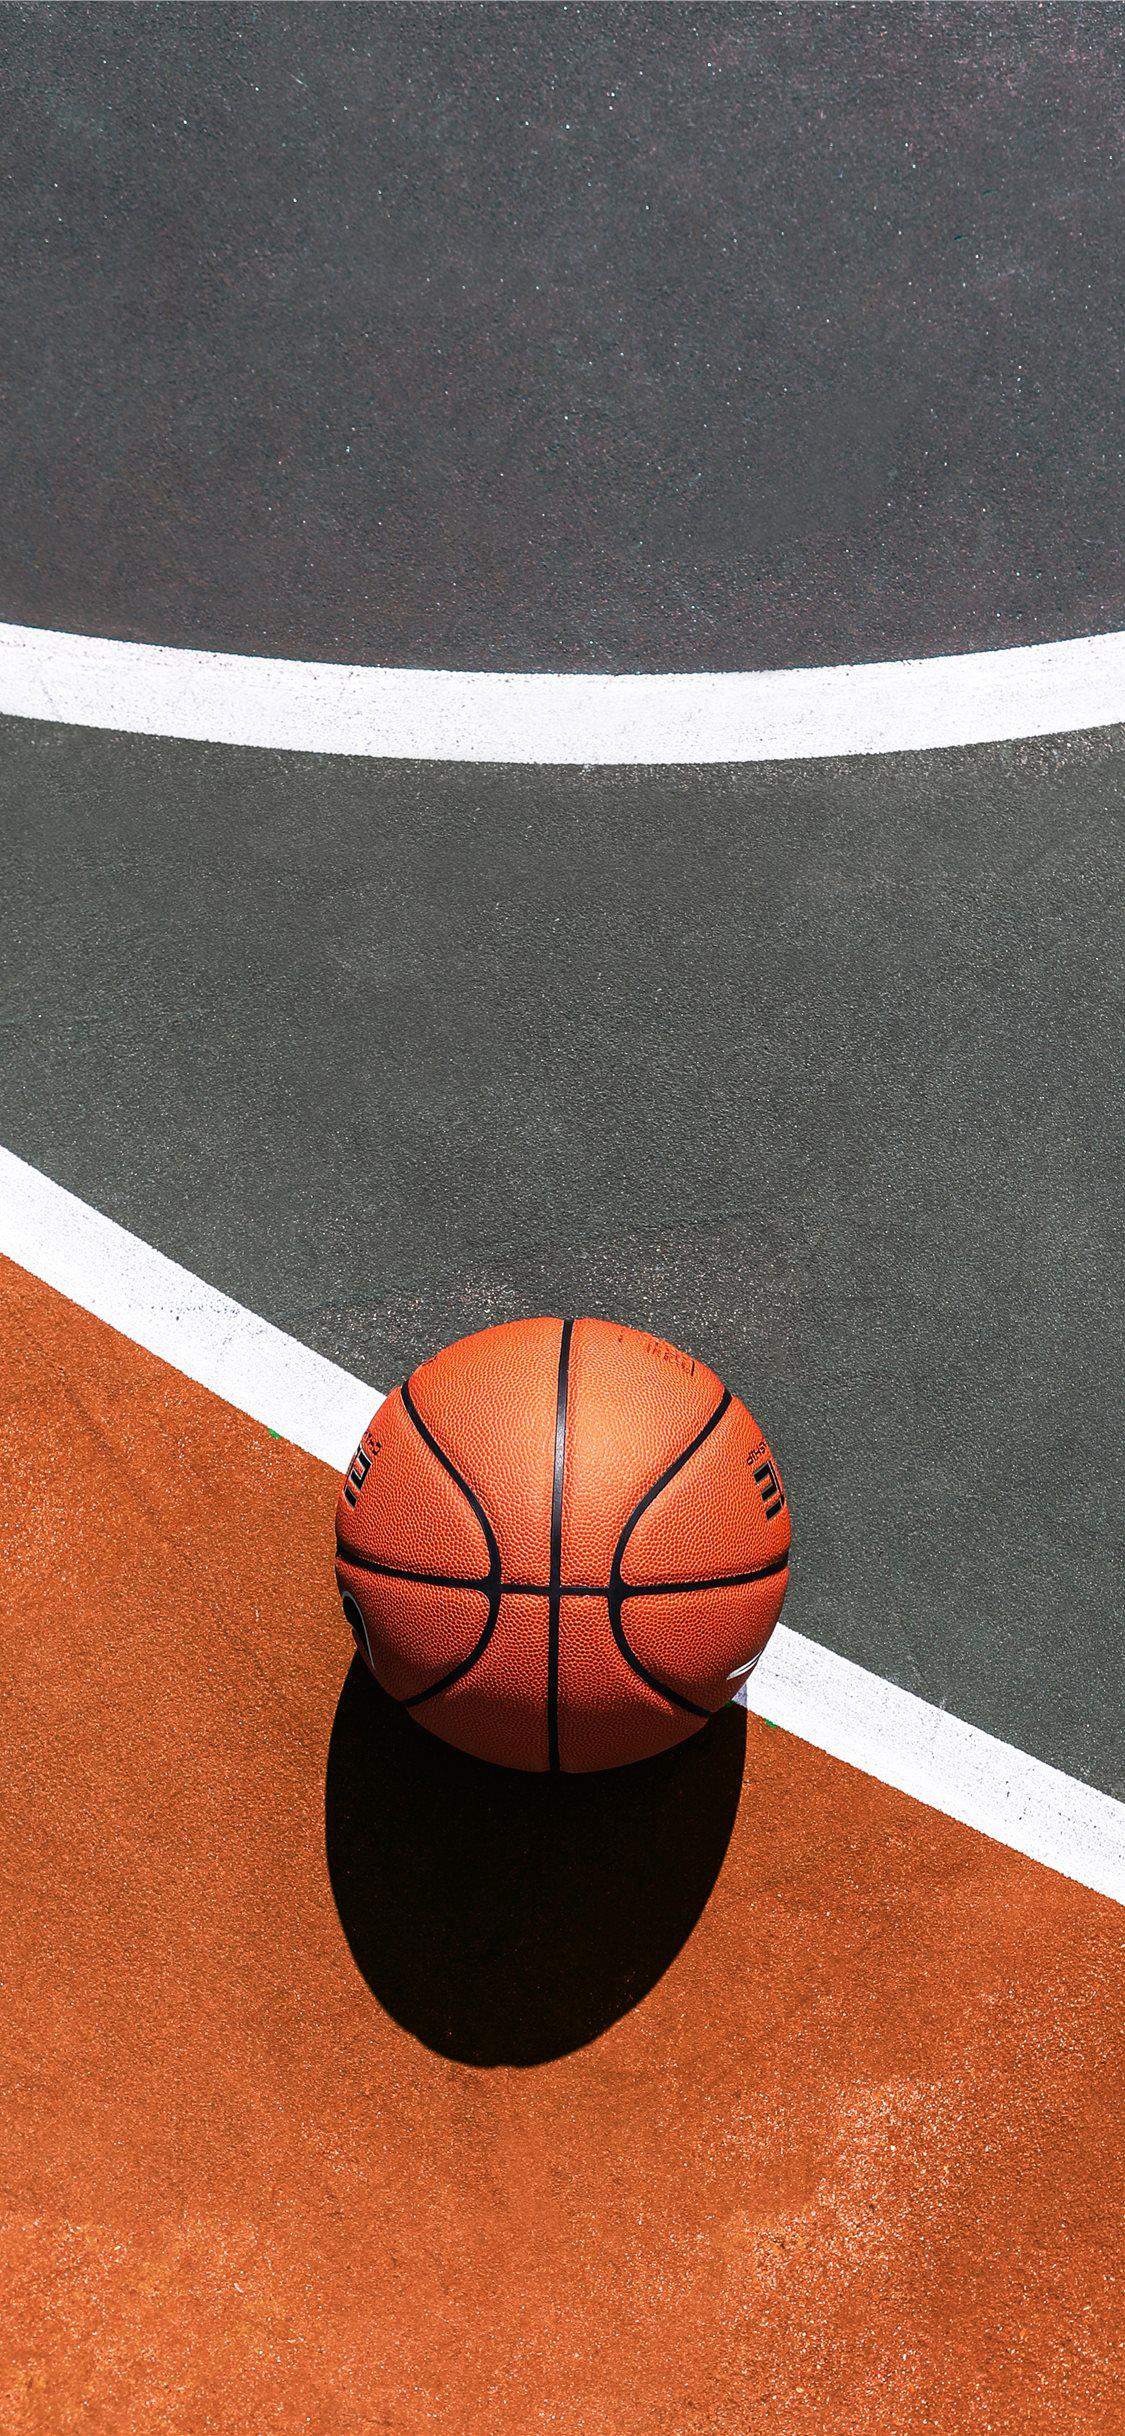 Sports Iphone Wallpapers